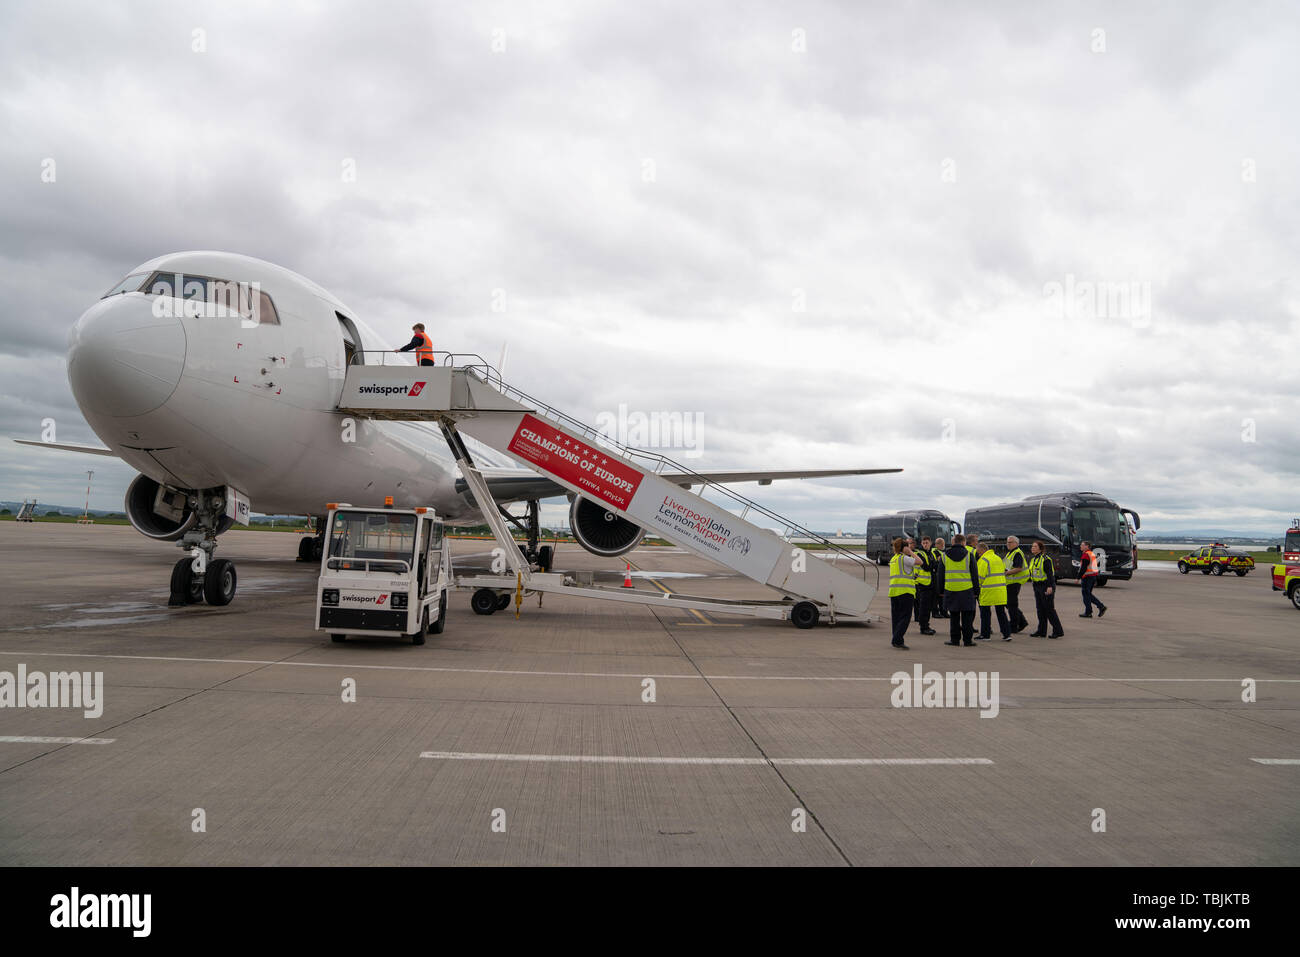 Liverpool, UK. 02nd June, 2019. The airplane carrying the Liverpool Football team and European Cup lands at Liverpool airport. Liverpool, UK. 2nd June, 2019. UEFA Champions League, Liverpool FC Champions League winners celebrations and open top bus parade ; Credit: Terry Donnelly/News Images Credit: News Images /Alamy Live News Stock Photo